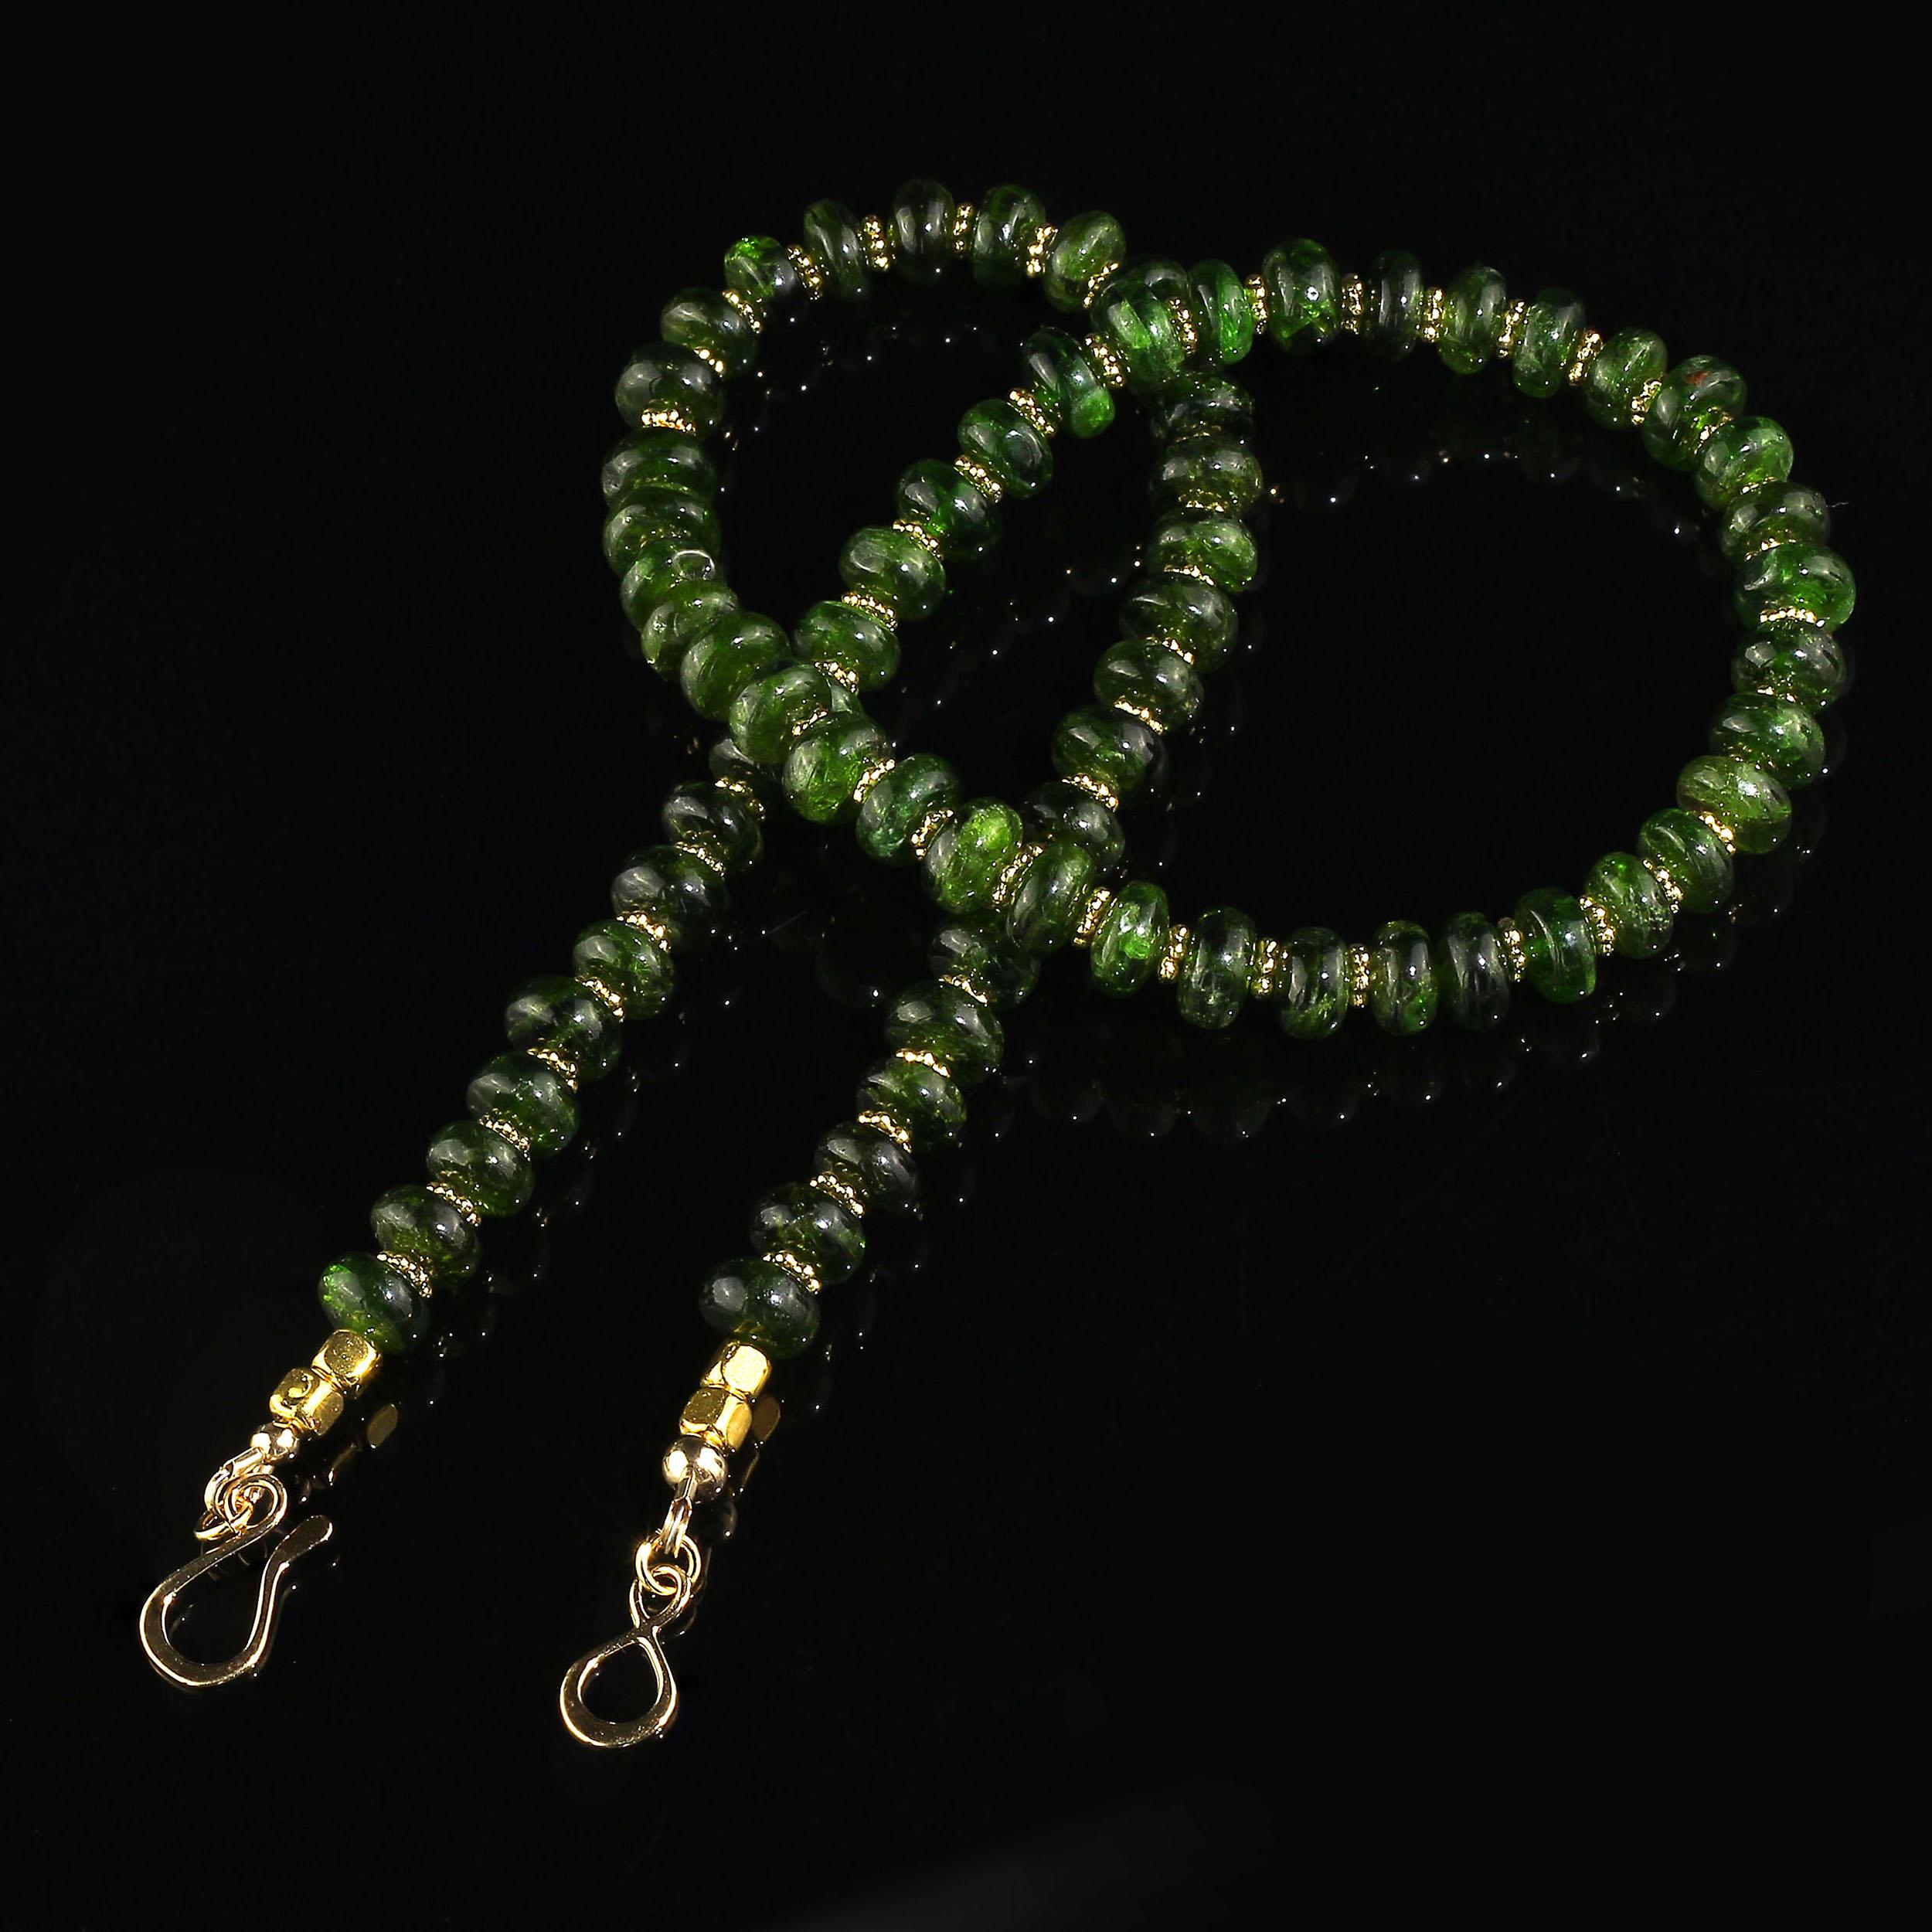 Women's or Men's Gemjunky Sparkling Chrome Diopside Necklace with Goldy Accents